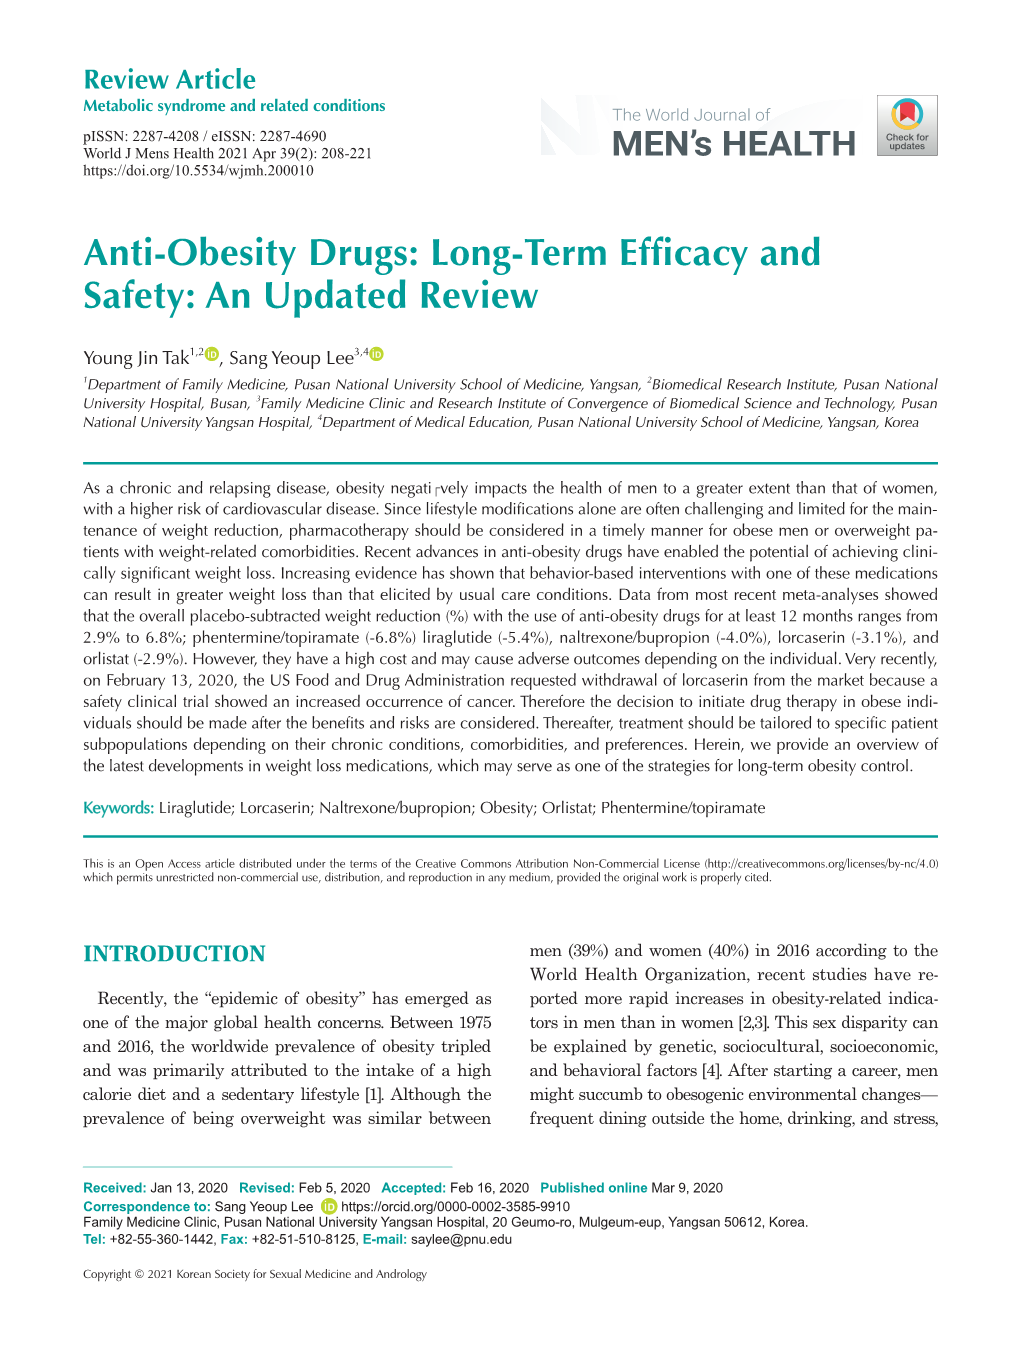 Anti-Obesity Drugs: Long-Term Efficacy and Safety: an Updated Review